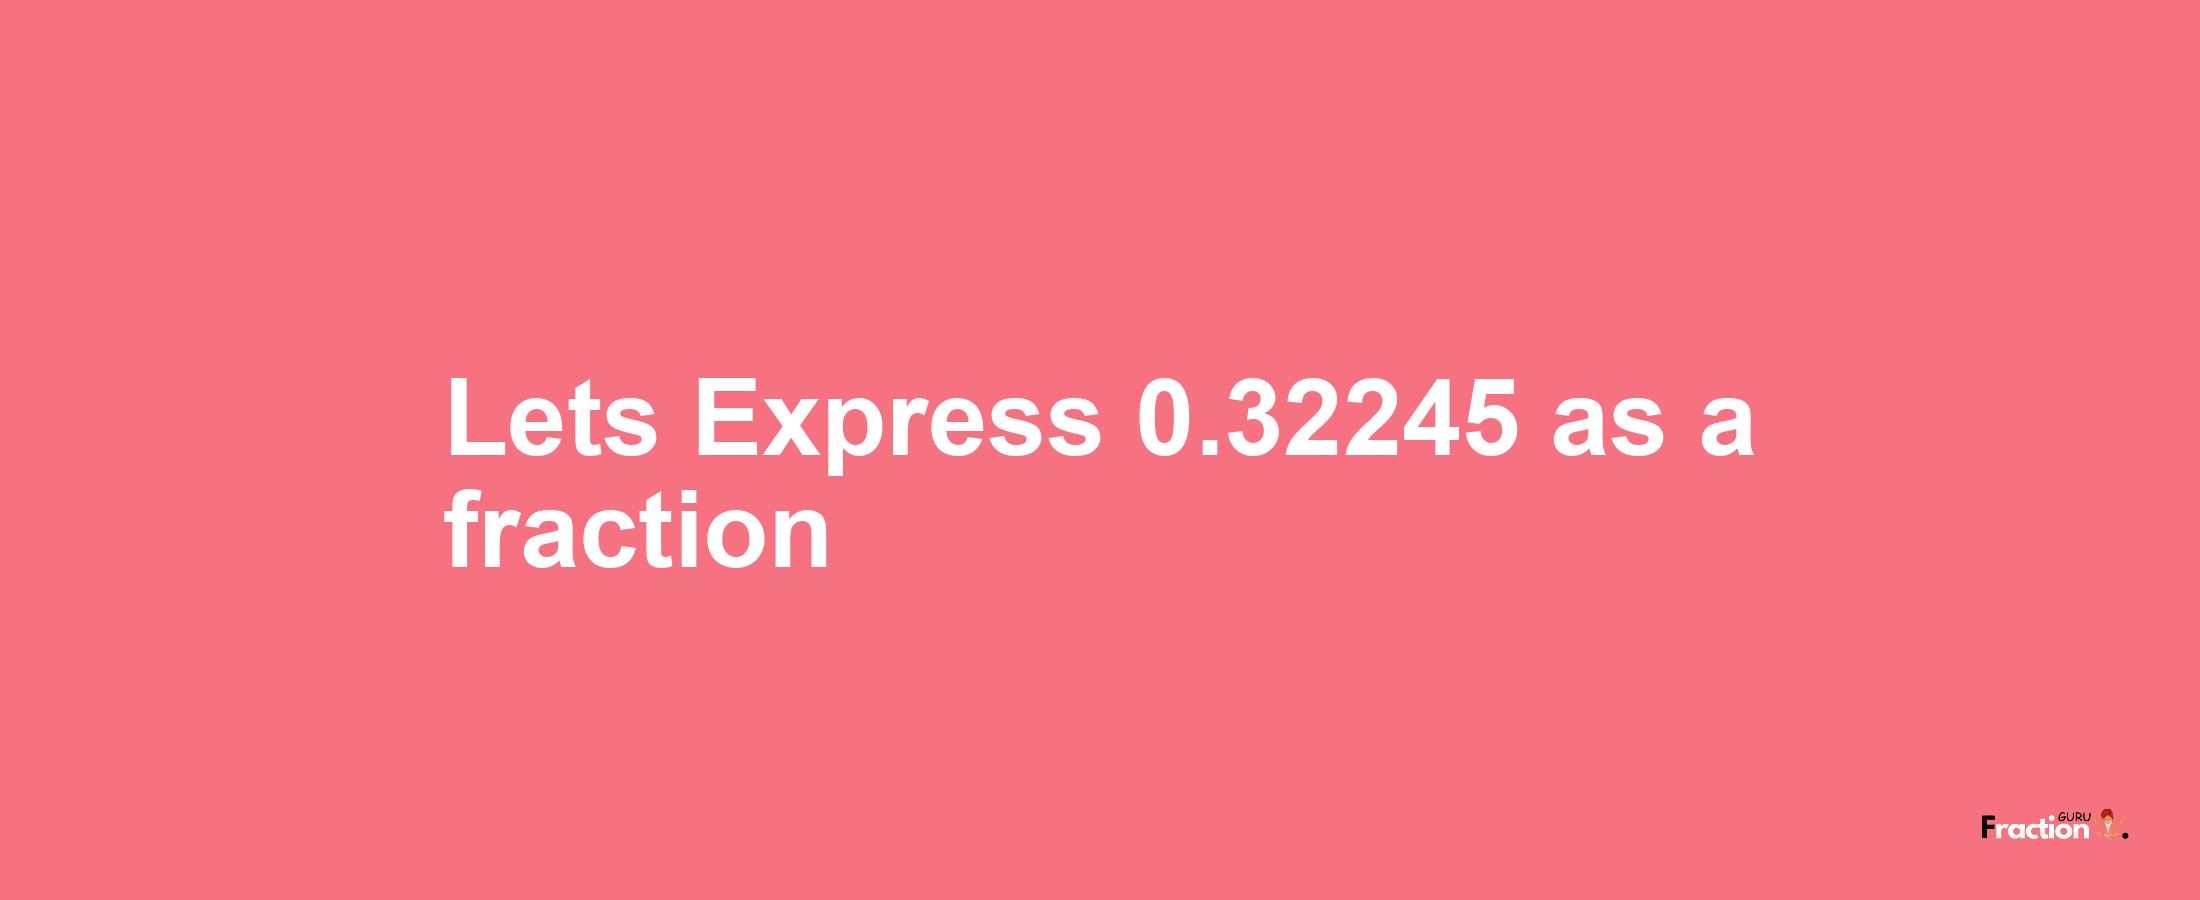 Lets Express 0.32245 as afraction